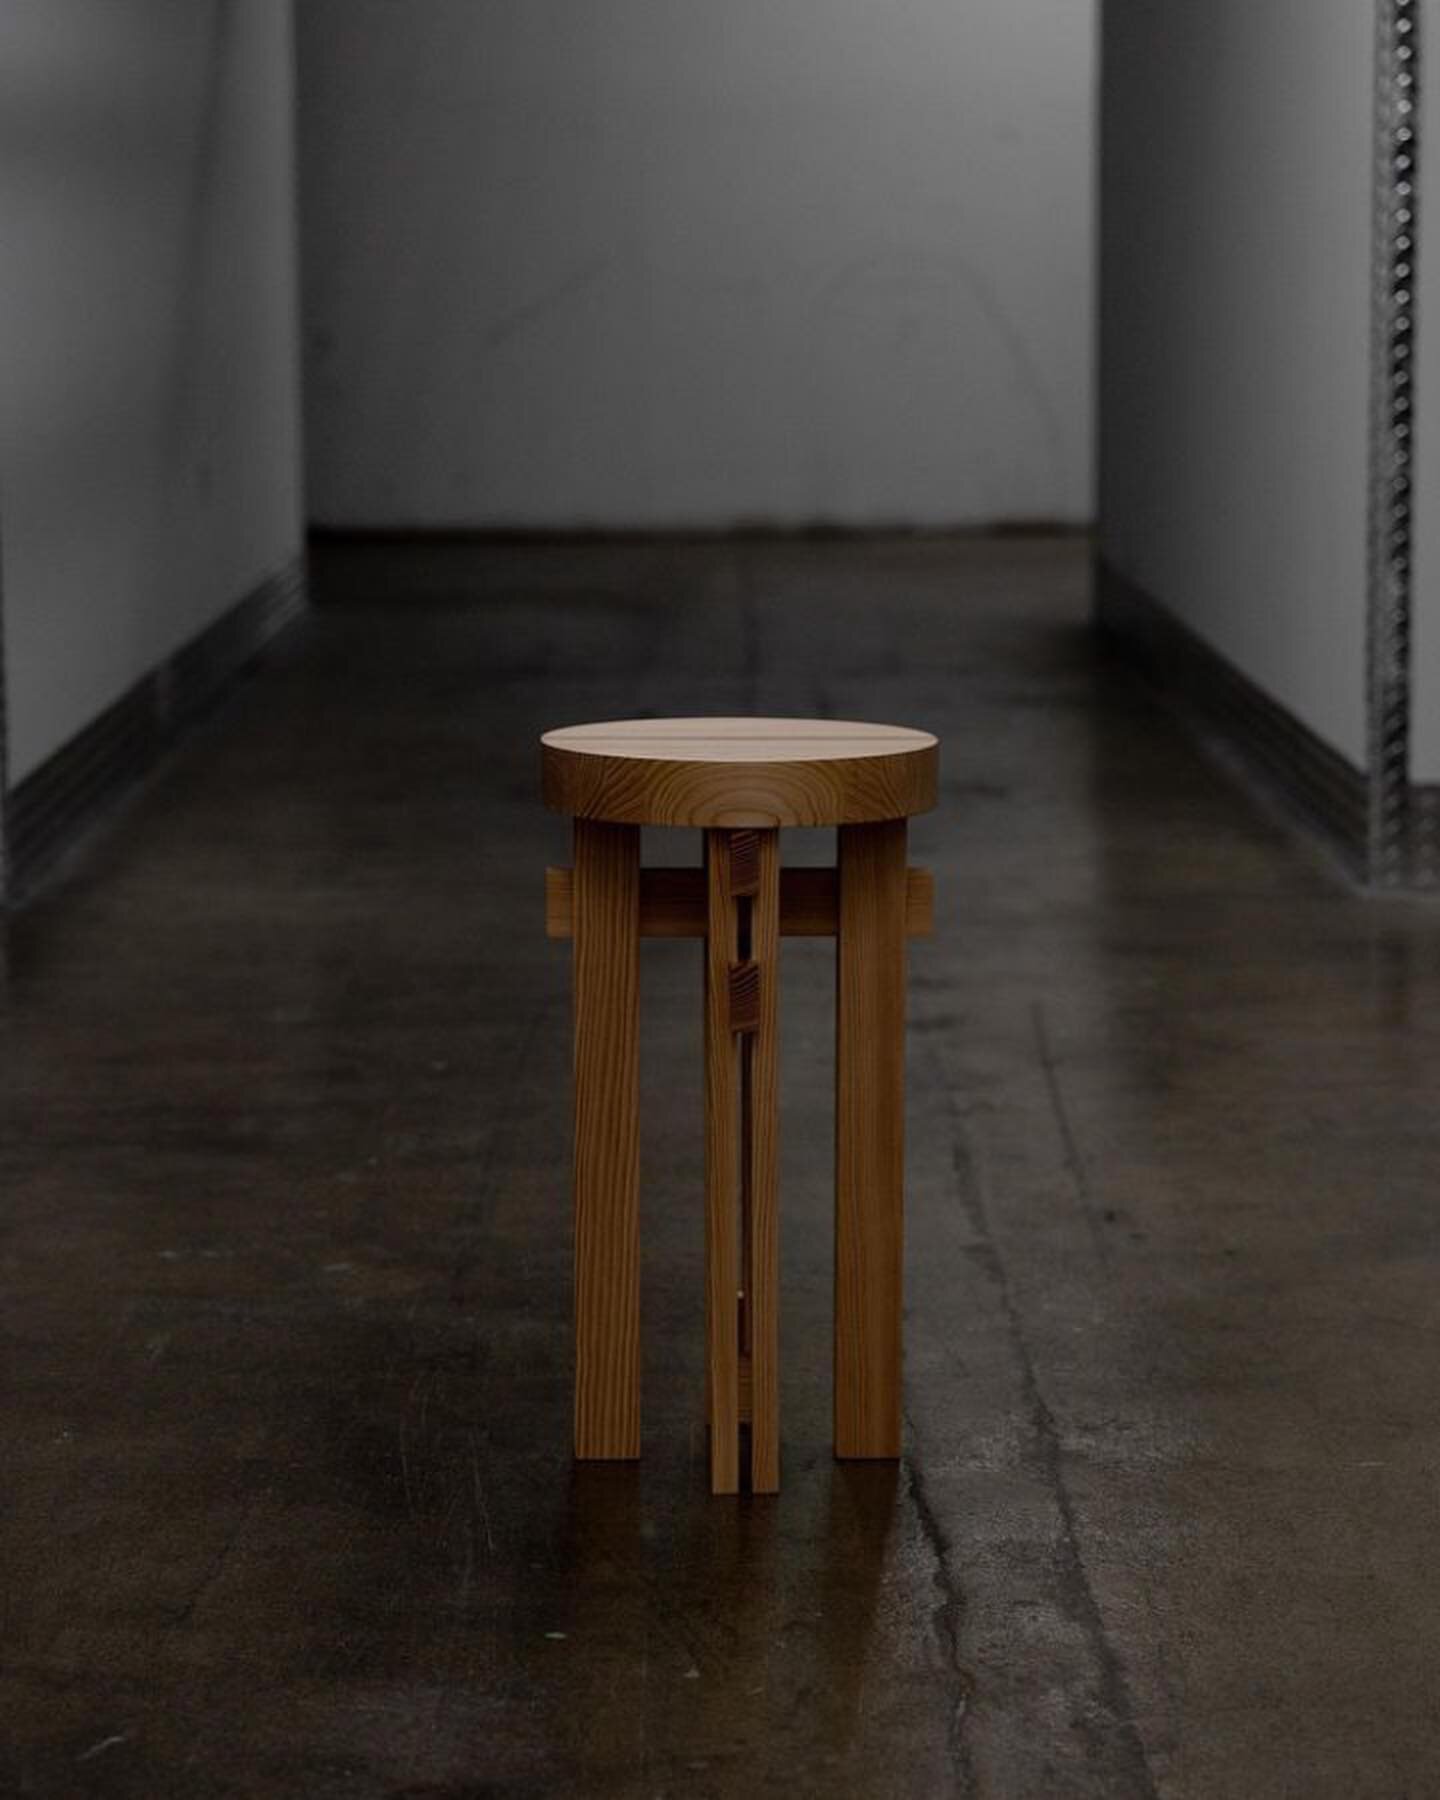 I shipped this stool to Los Angeles a few weeks ago to participate in the CLEAR LA exhibition curated by @normal.objects